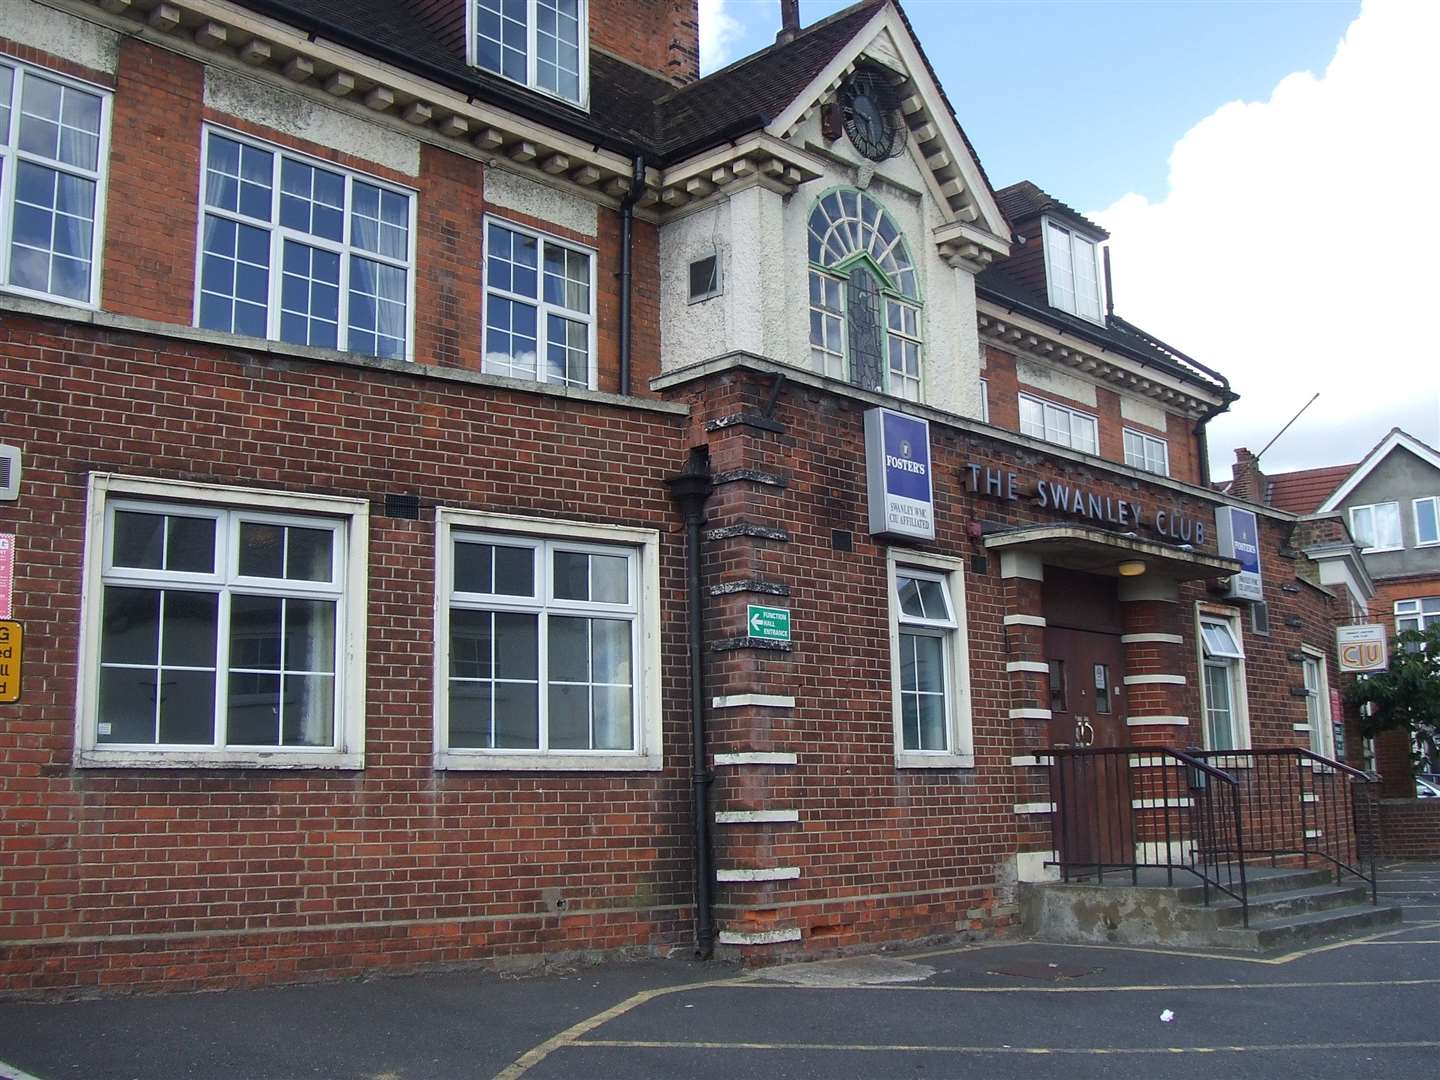 The former Working Men's Club in Swanley High Street was demolished some years ago